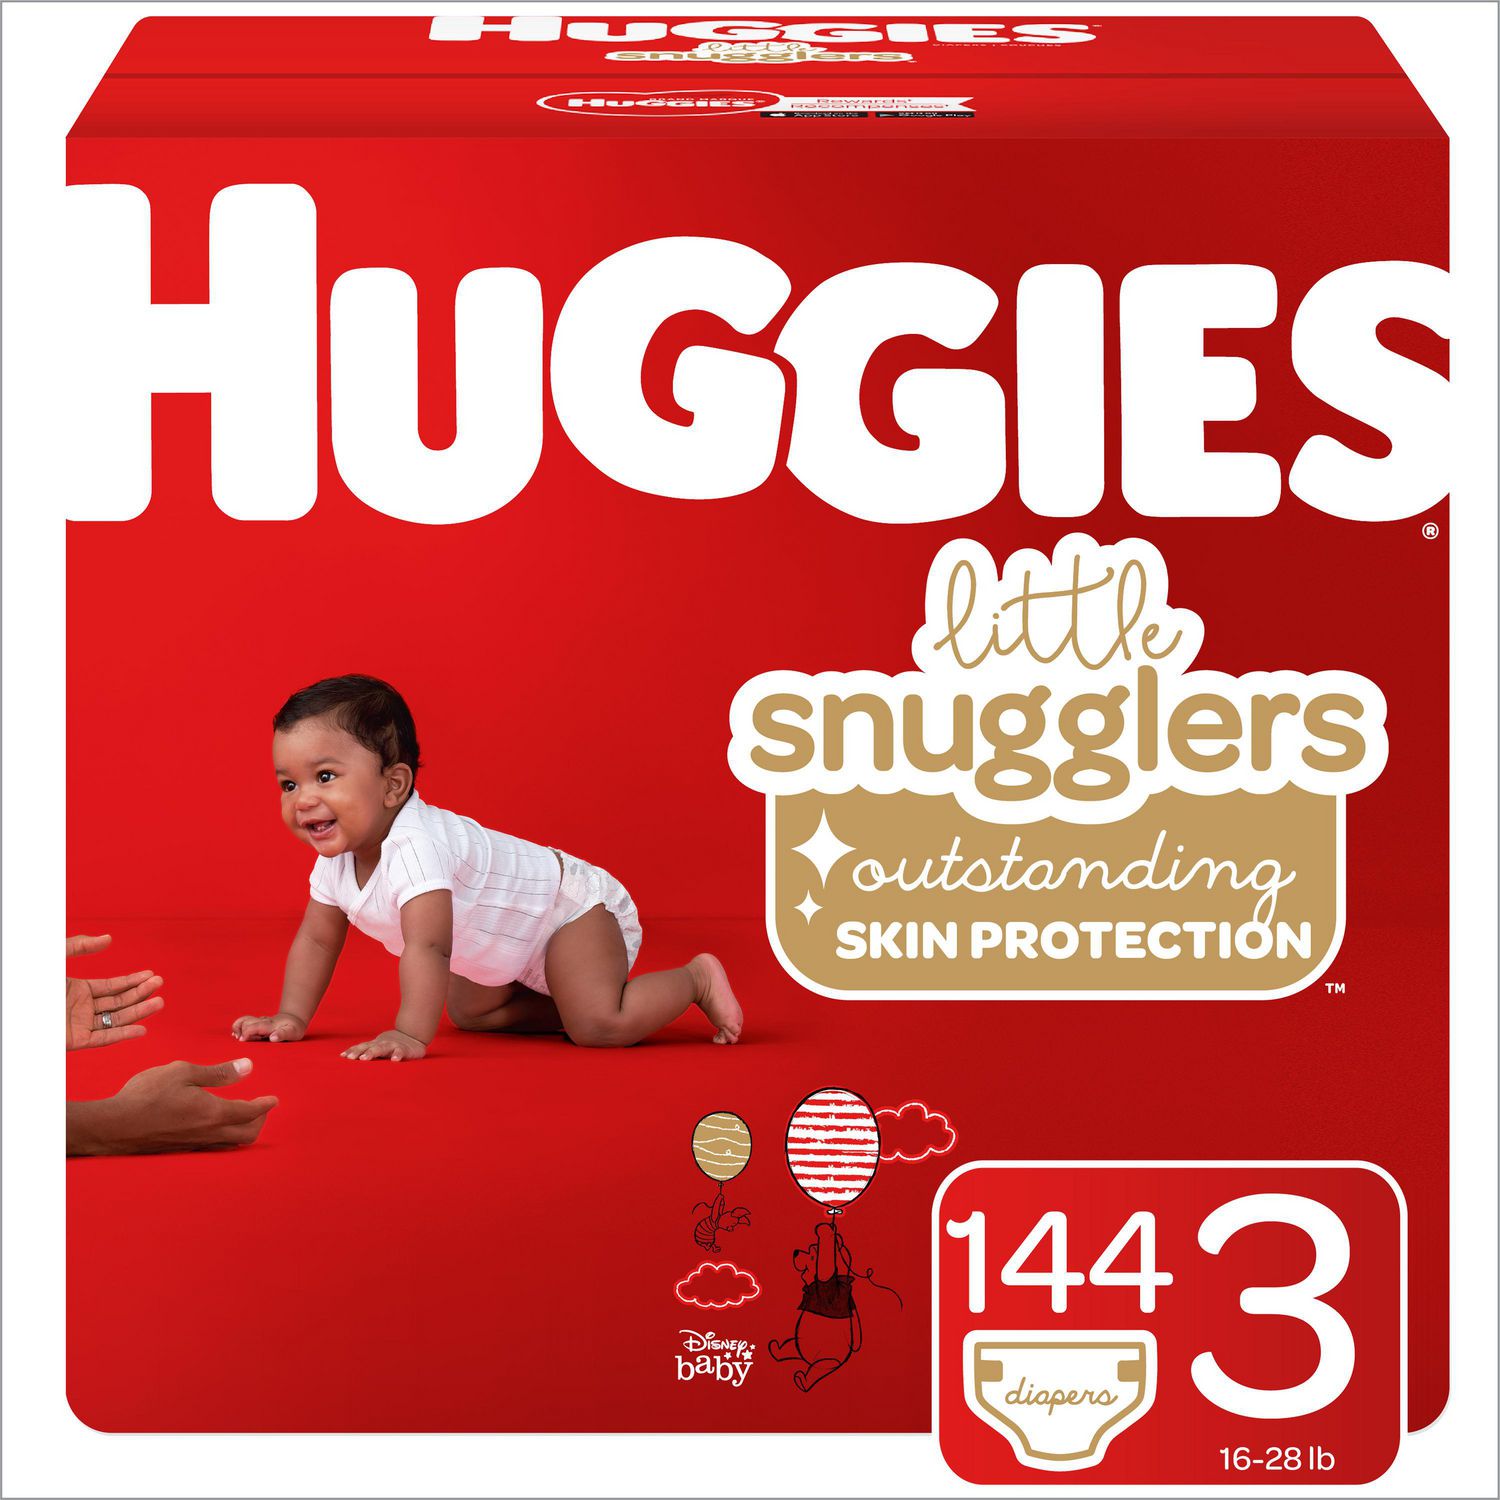 Huggies Little Snugglers - Les Couches EBulk, taille 2 